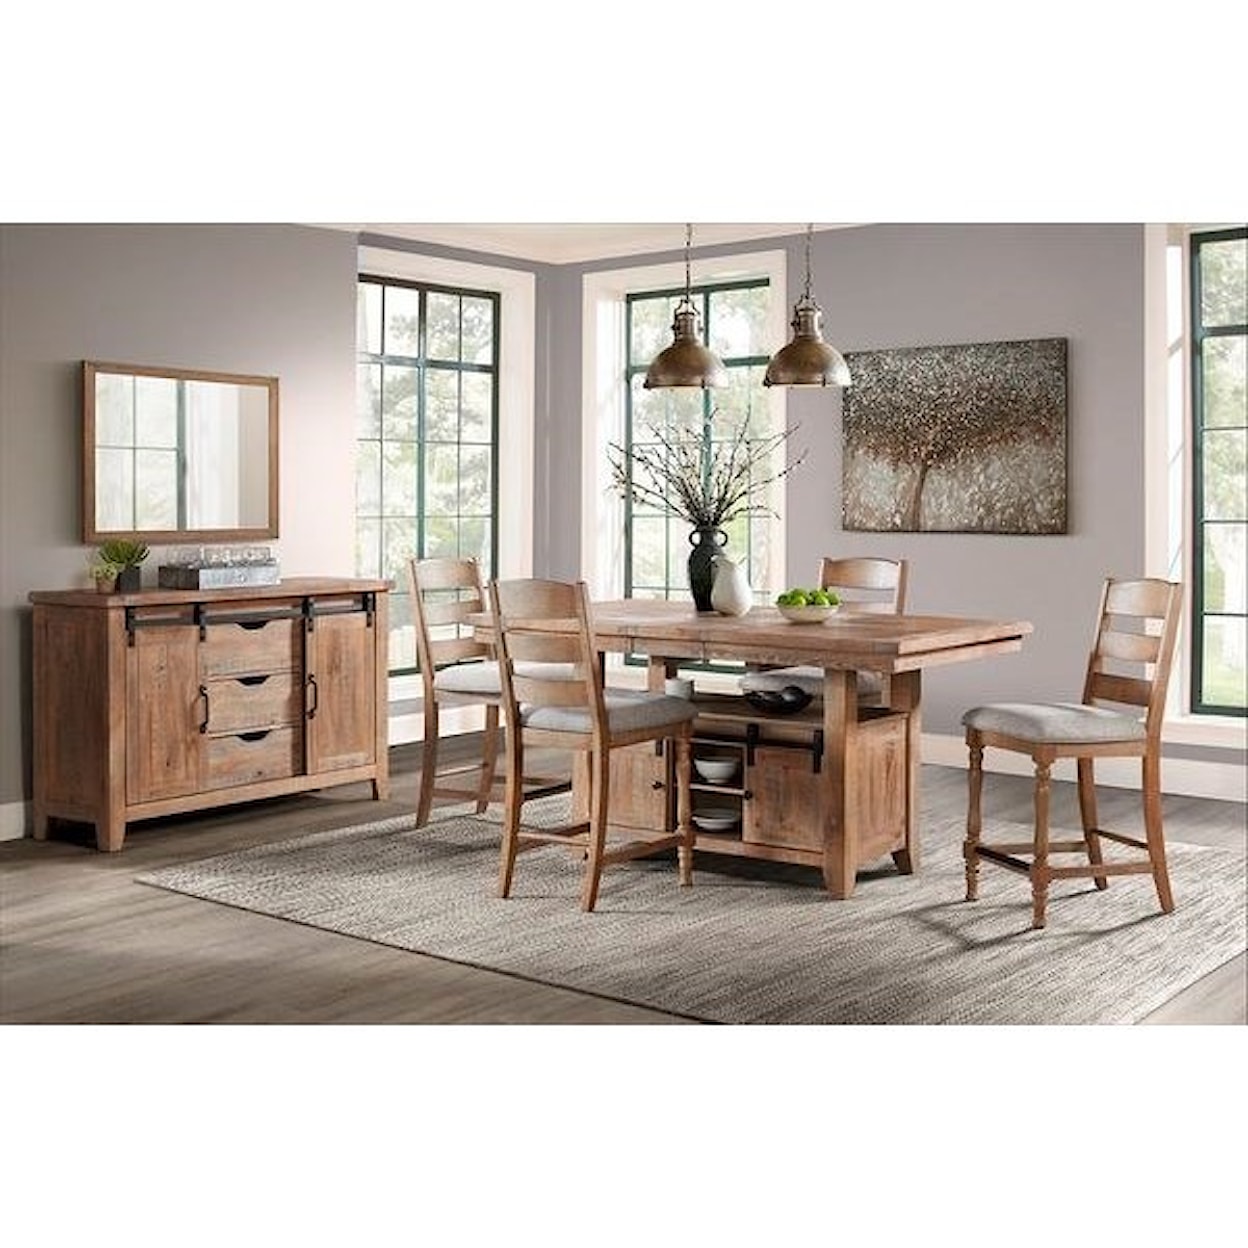 Intercon Highland Casual Dining Room Group